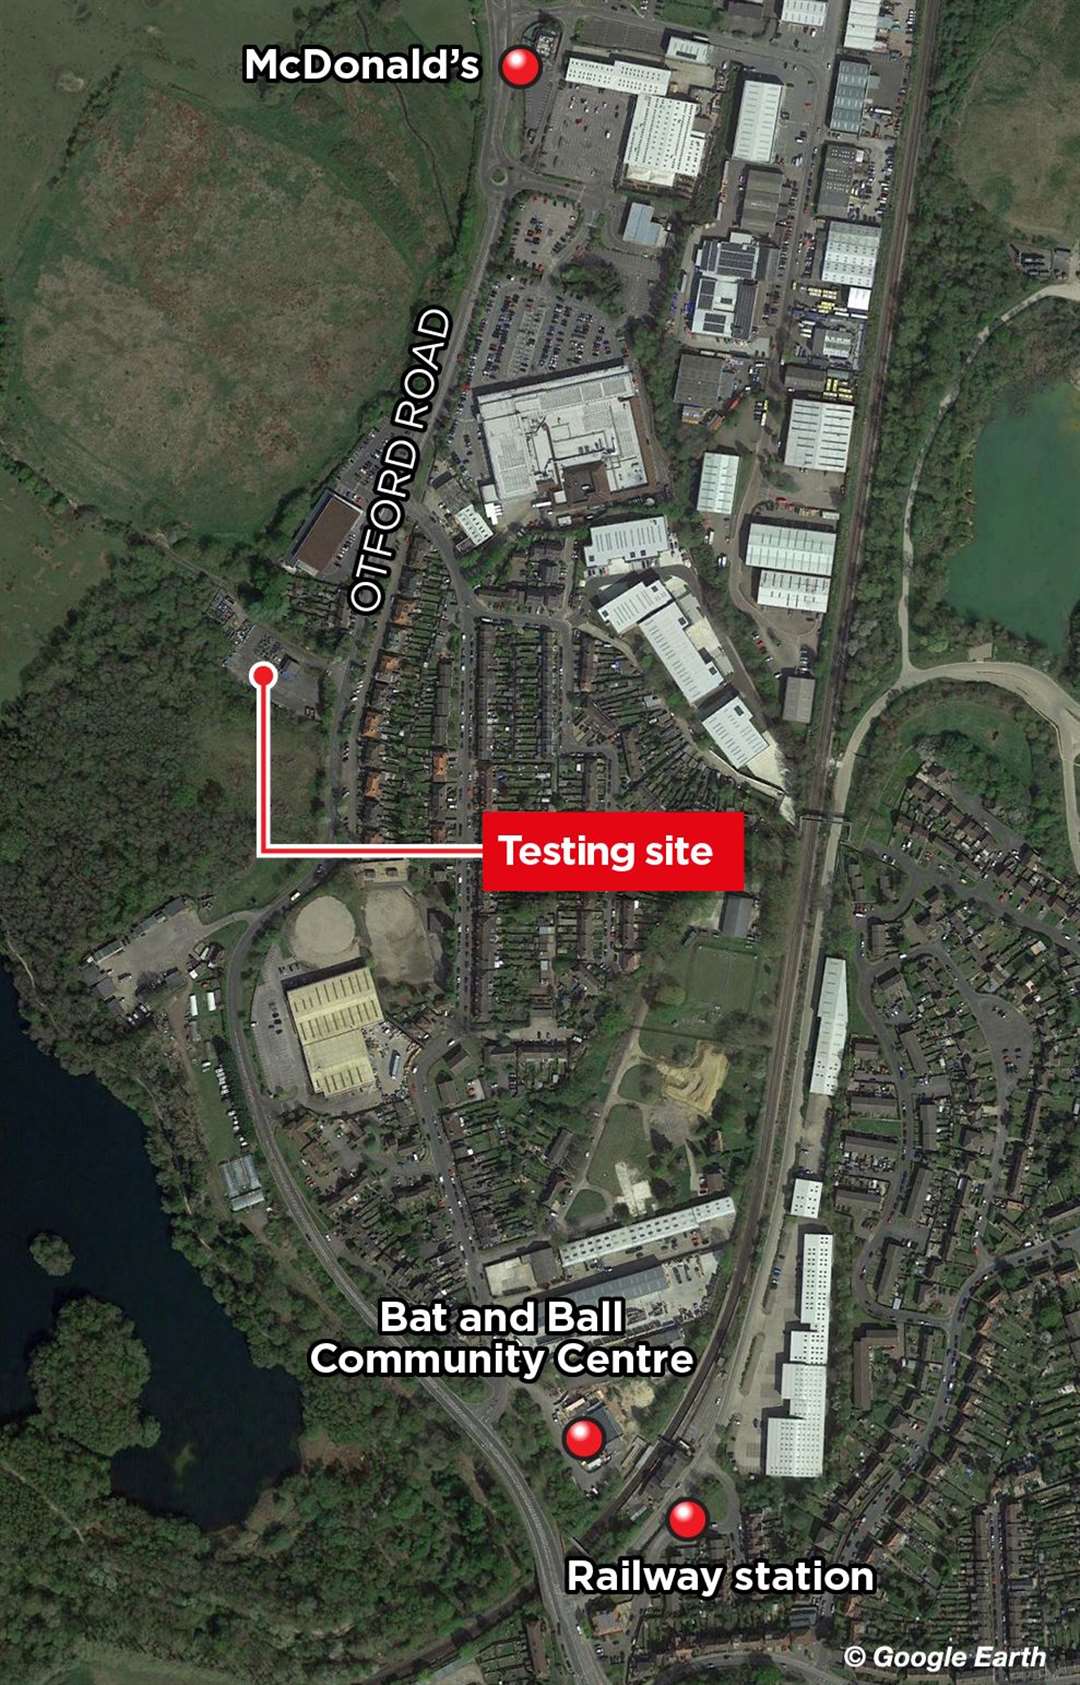 They were sent to McDonald's and the Bat and Ball centre before finding the testing site